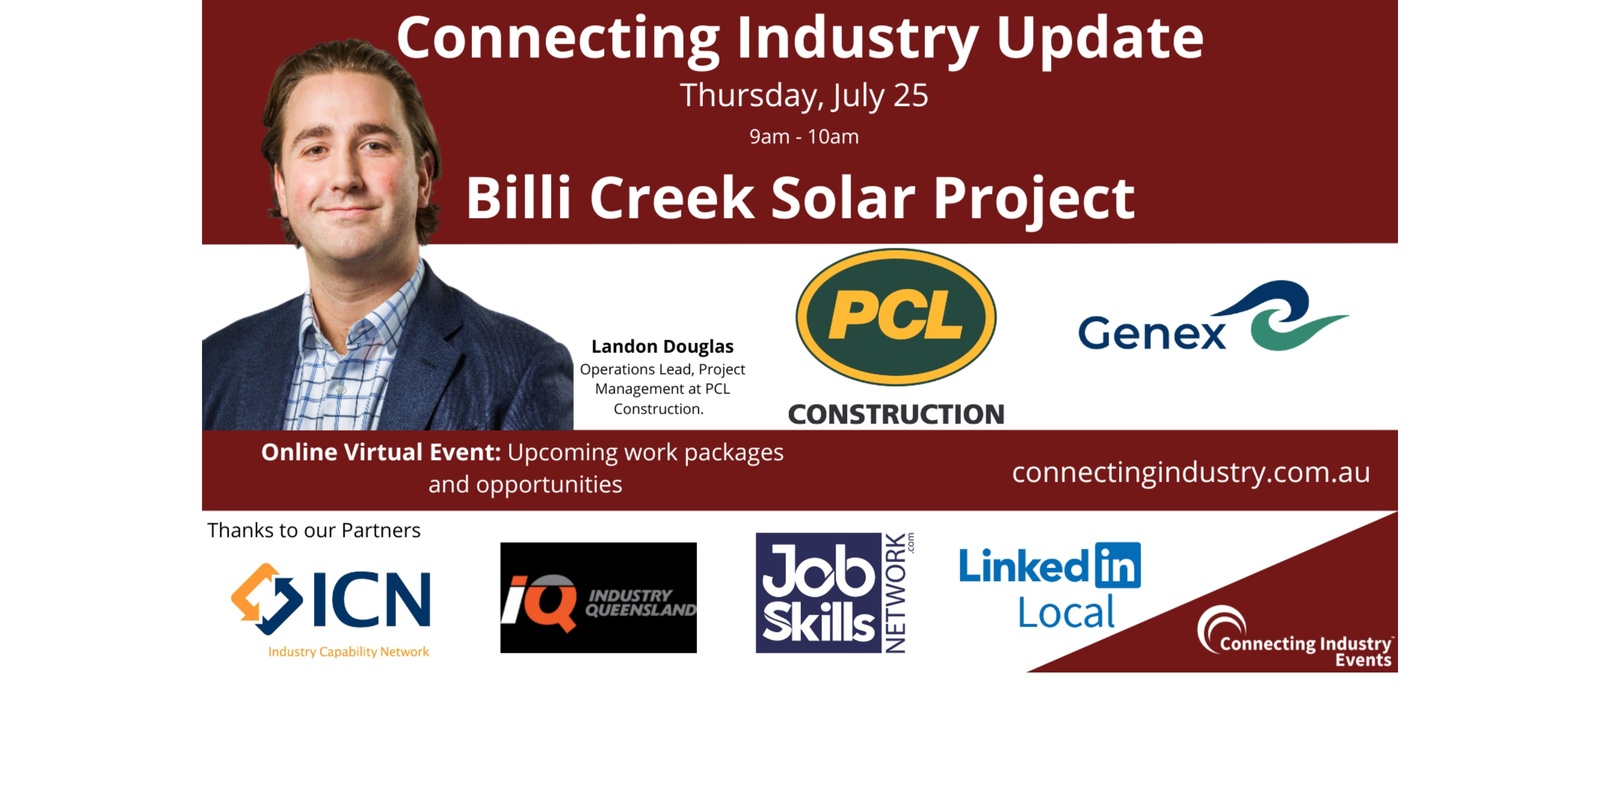 Banner image for Connecting Industry Update: Bulli Creek Solar Project